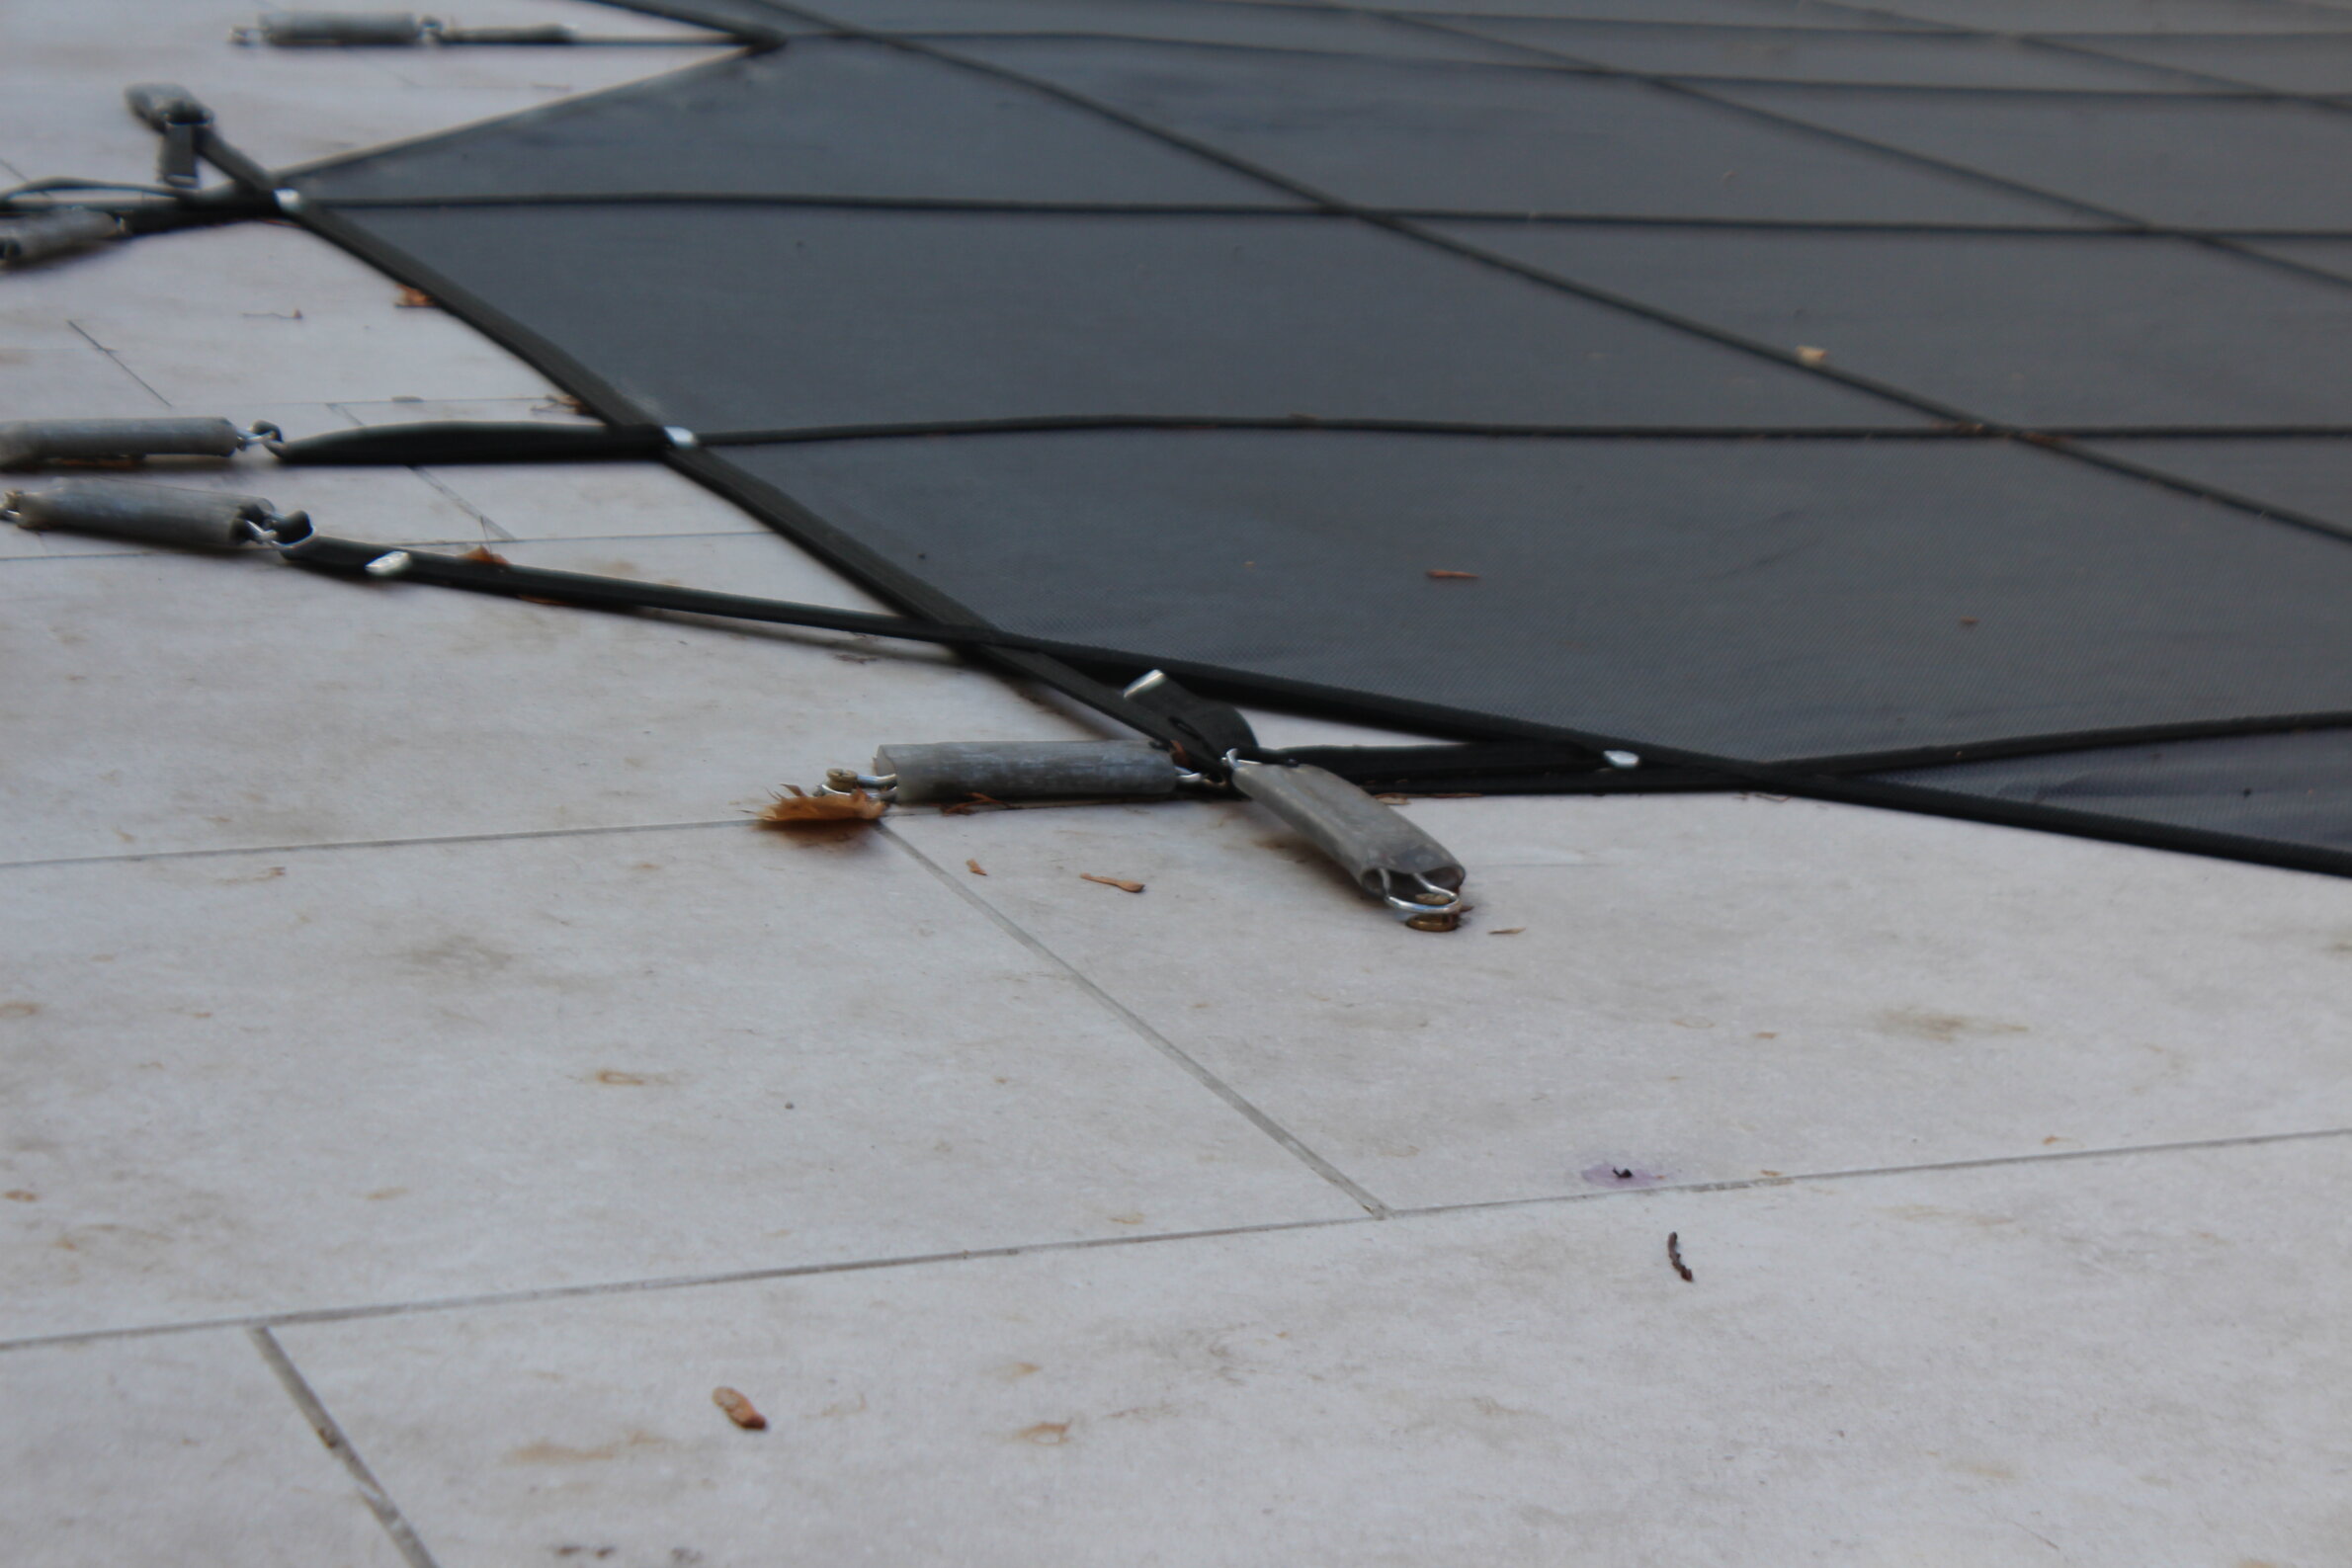 This image shows an outdoor flooring system with interlocking black panels, partially disassembled, revealing the underlying stone tiles and metal connectors.